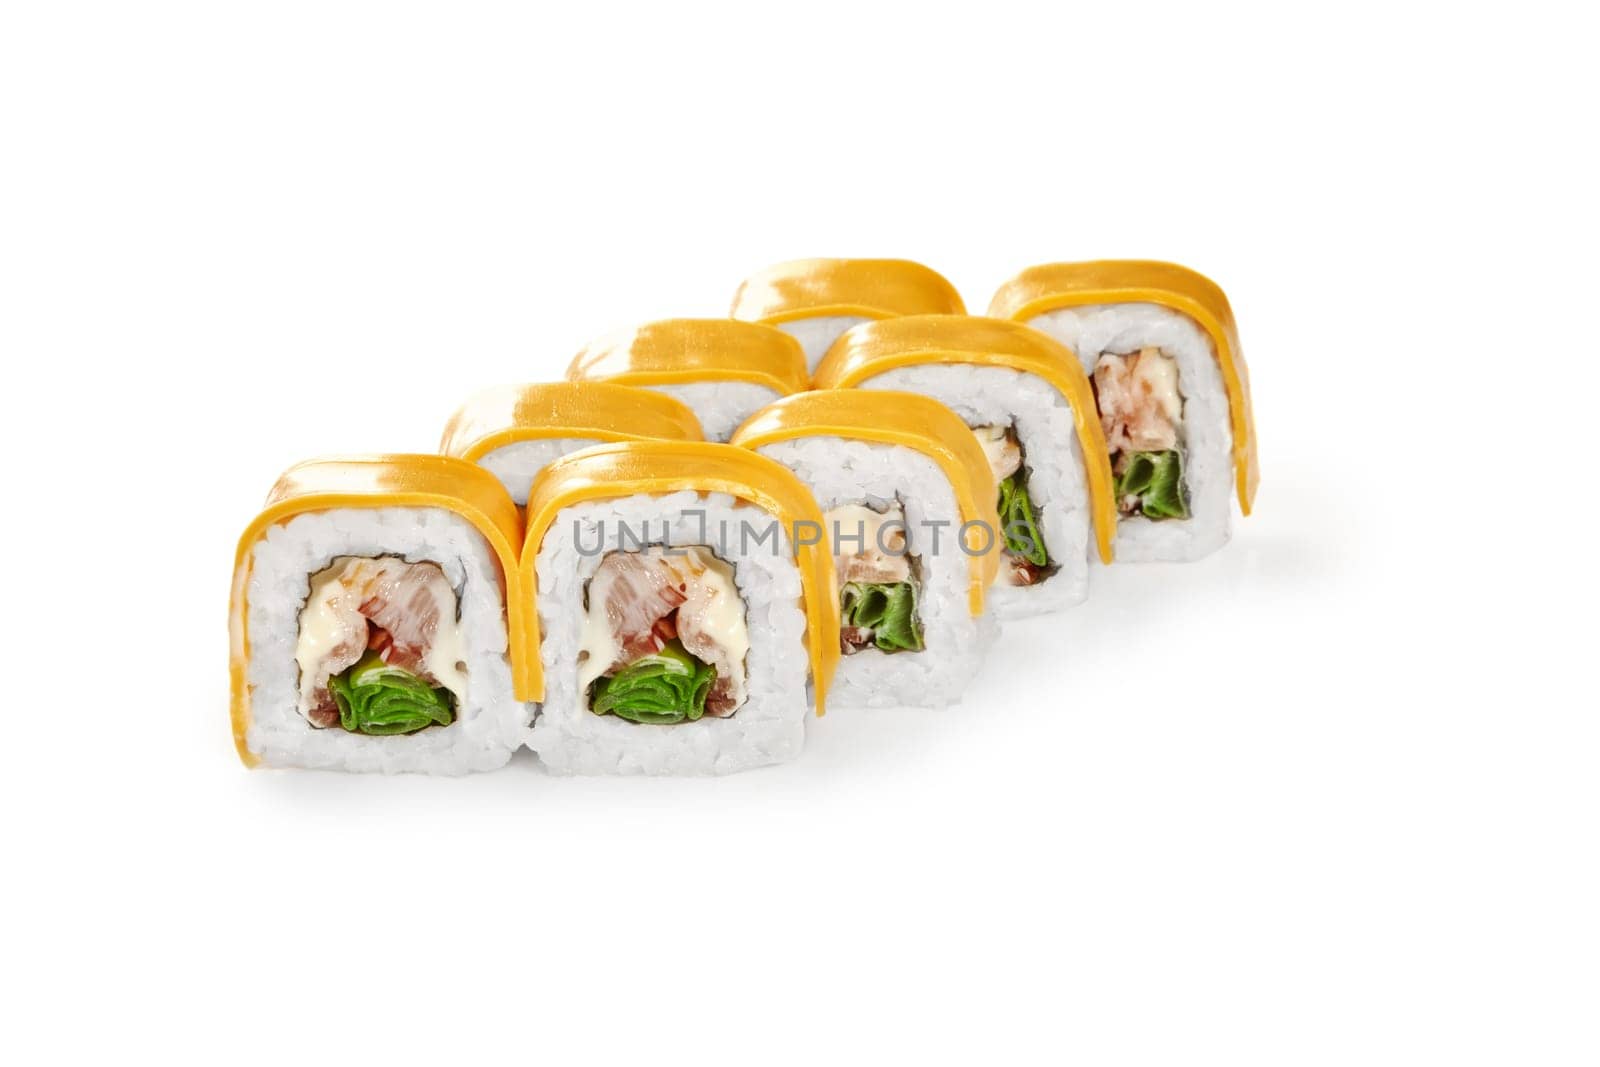 Cheddar topped eel sushi rolls with cream cheese and greens by nazarovsergey